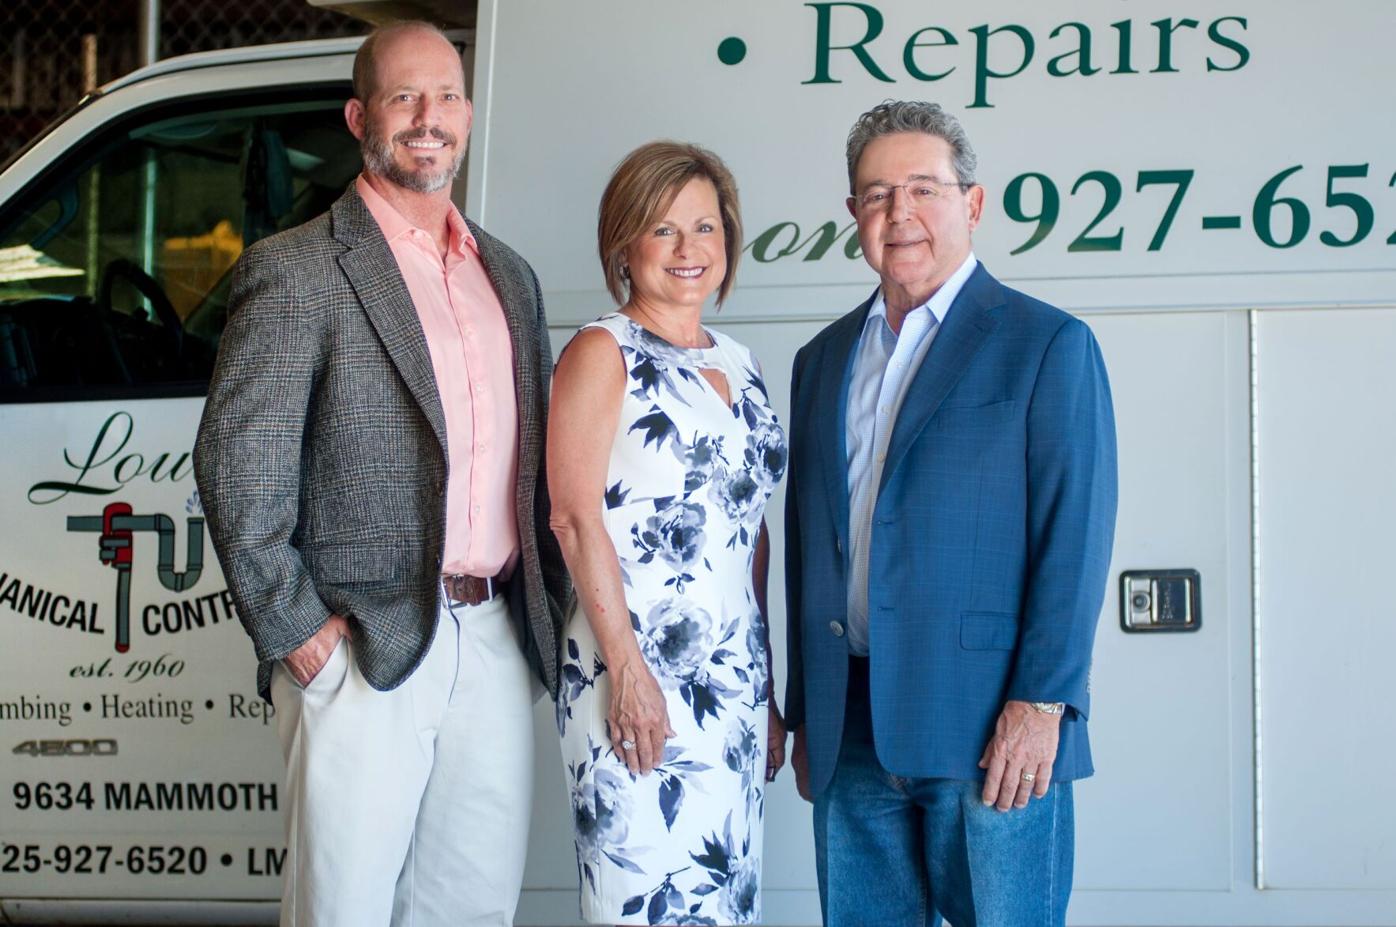 Family-owned Louis Mechanical Contractors keeps focus on honesty